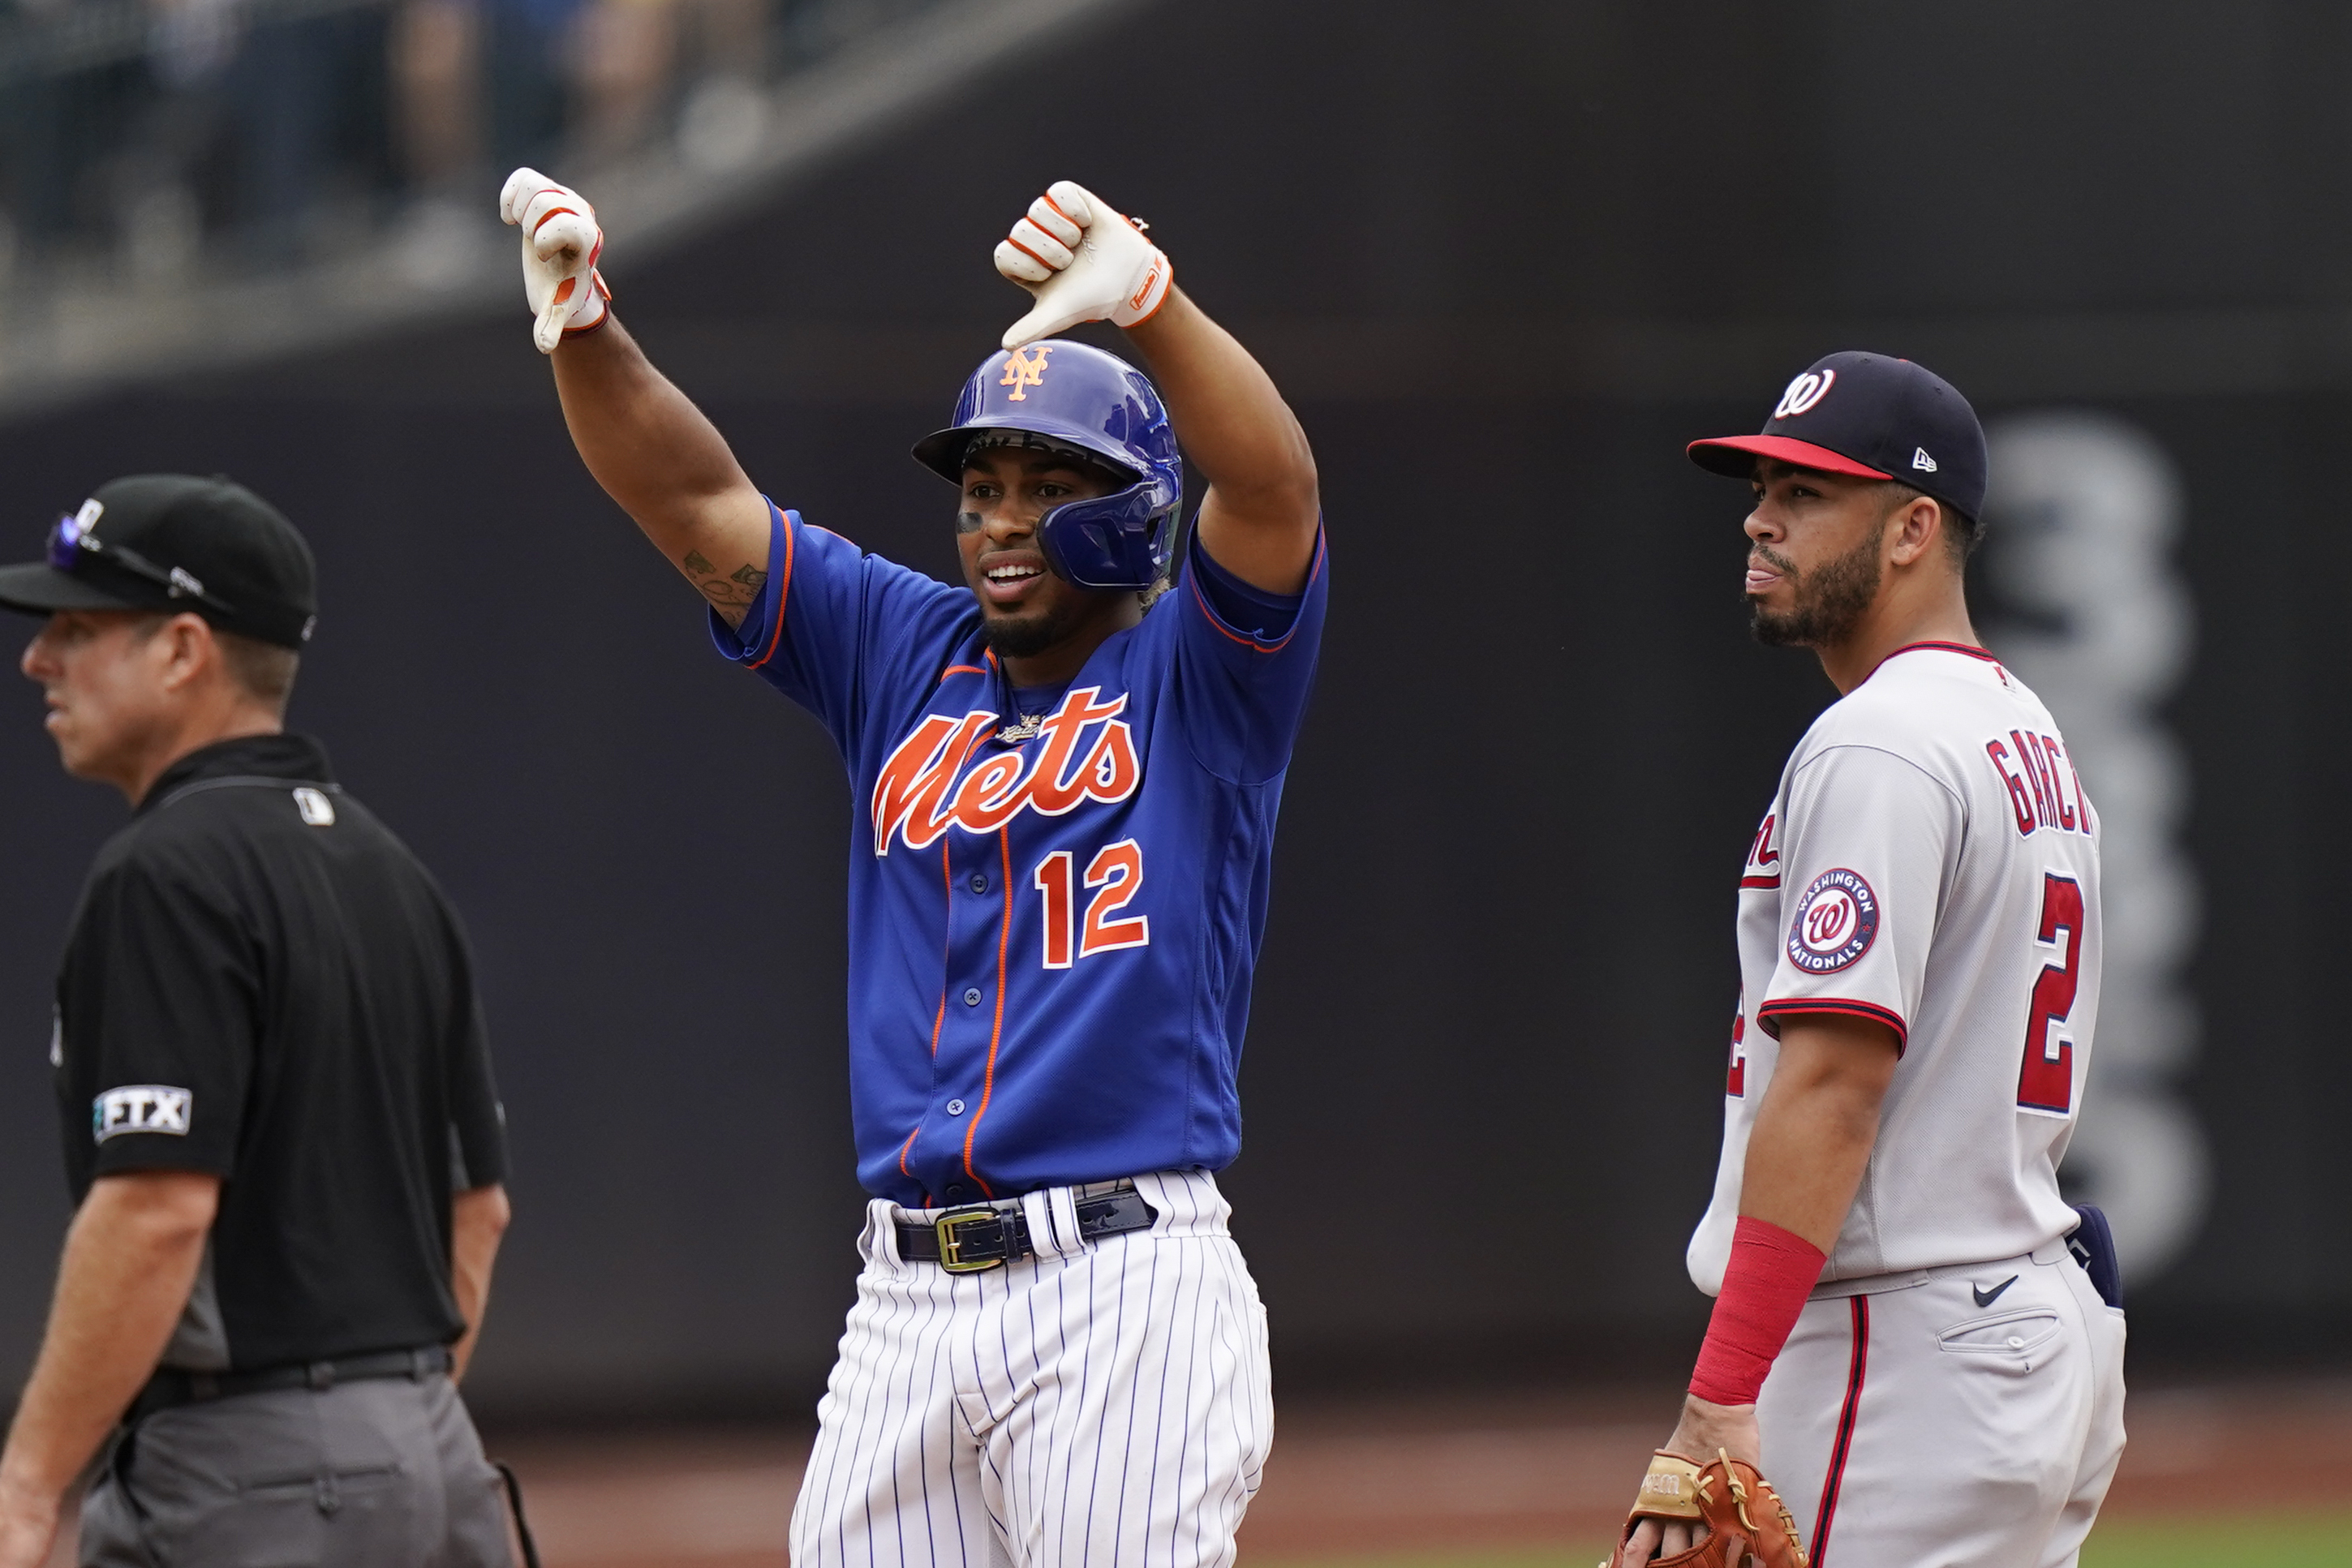 Francisco Lindor Impresses In Mets' Series Loss to Giants